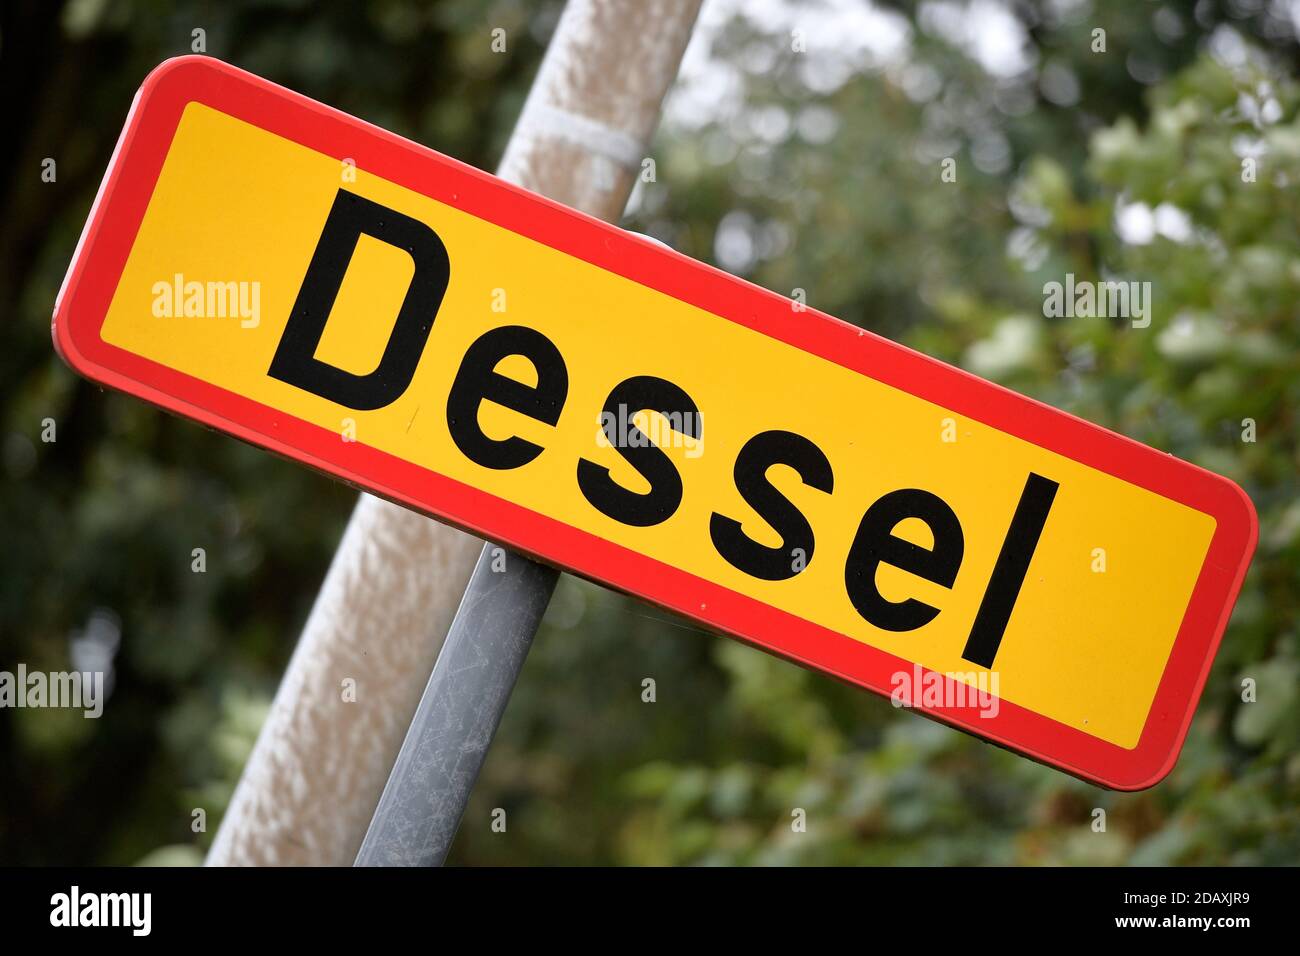 Illustration shows the name of the Dessel municipality on a road sign, Friday 21 September 2018. BELGA PHOTO YORICK JANSENS Stock Photo